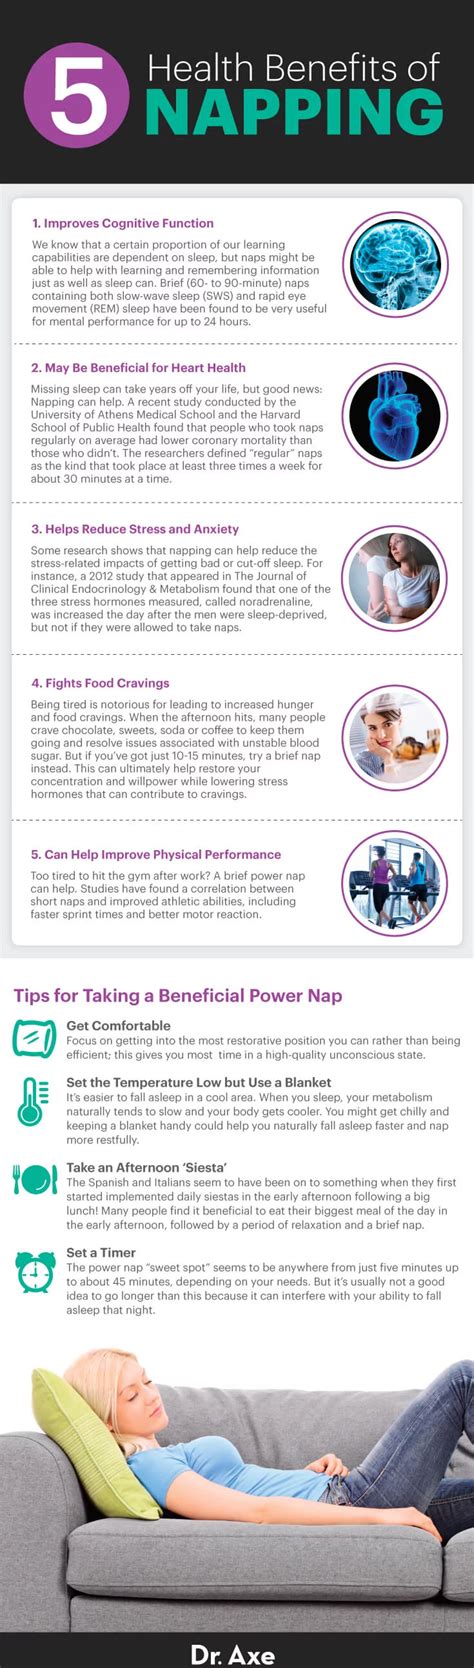 is napping good or bad for you the science of a power nap dr axe nap benefits health and